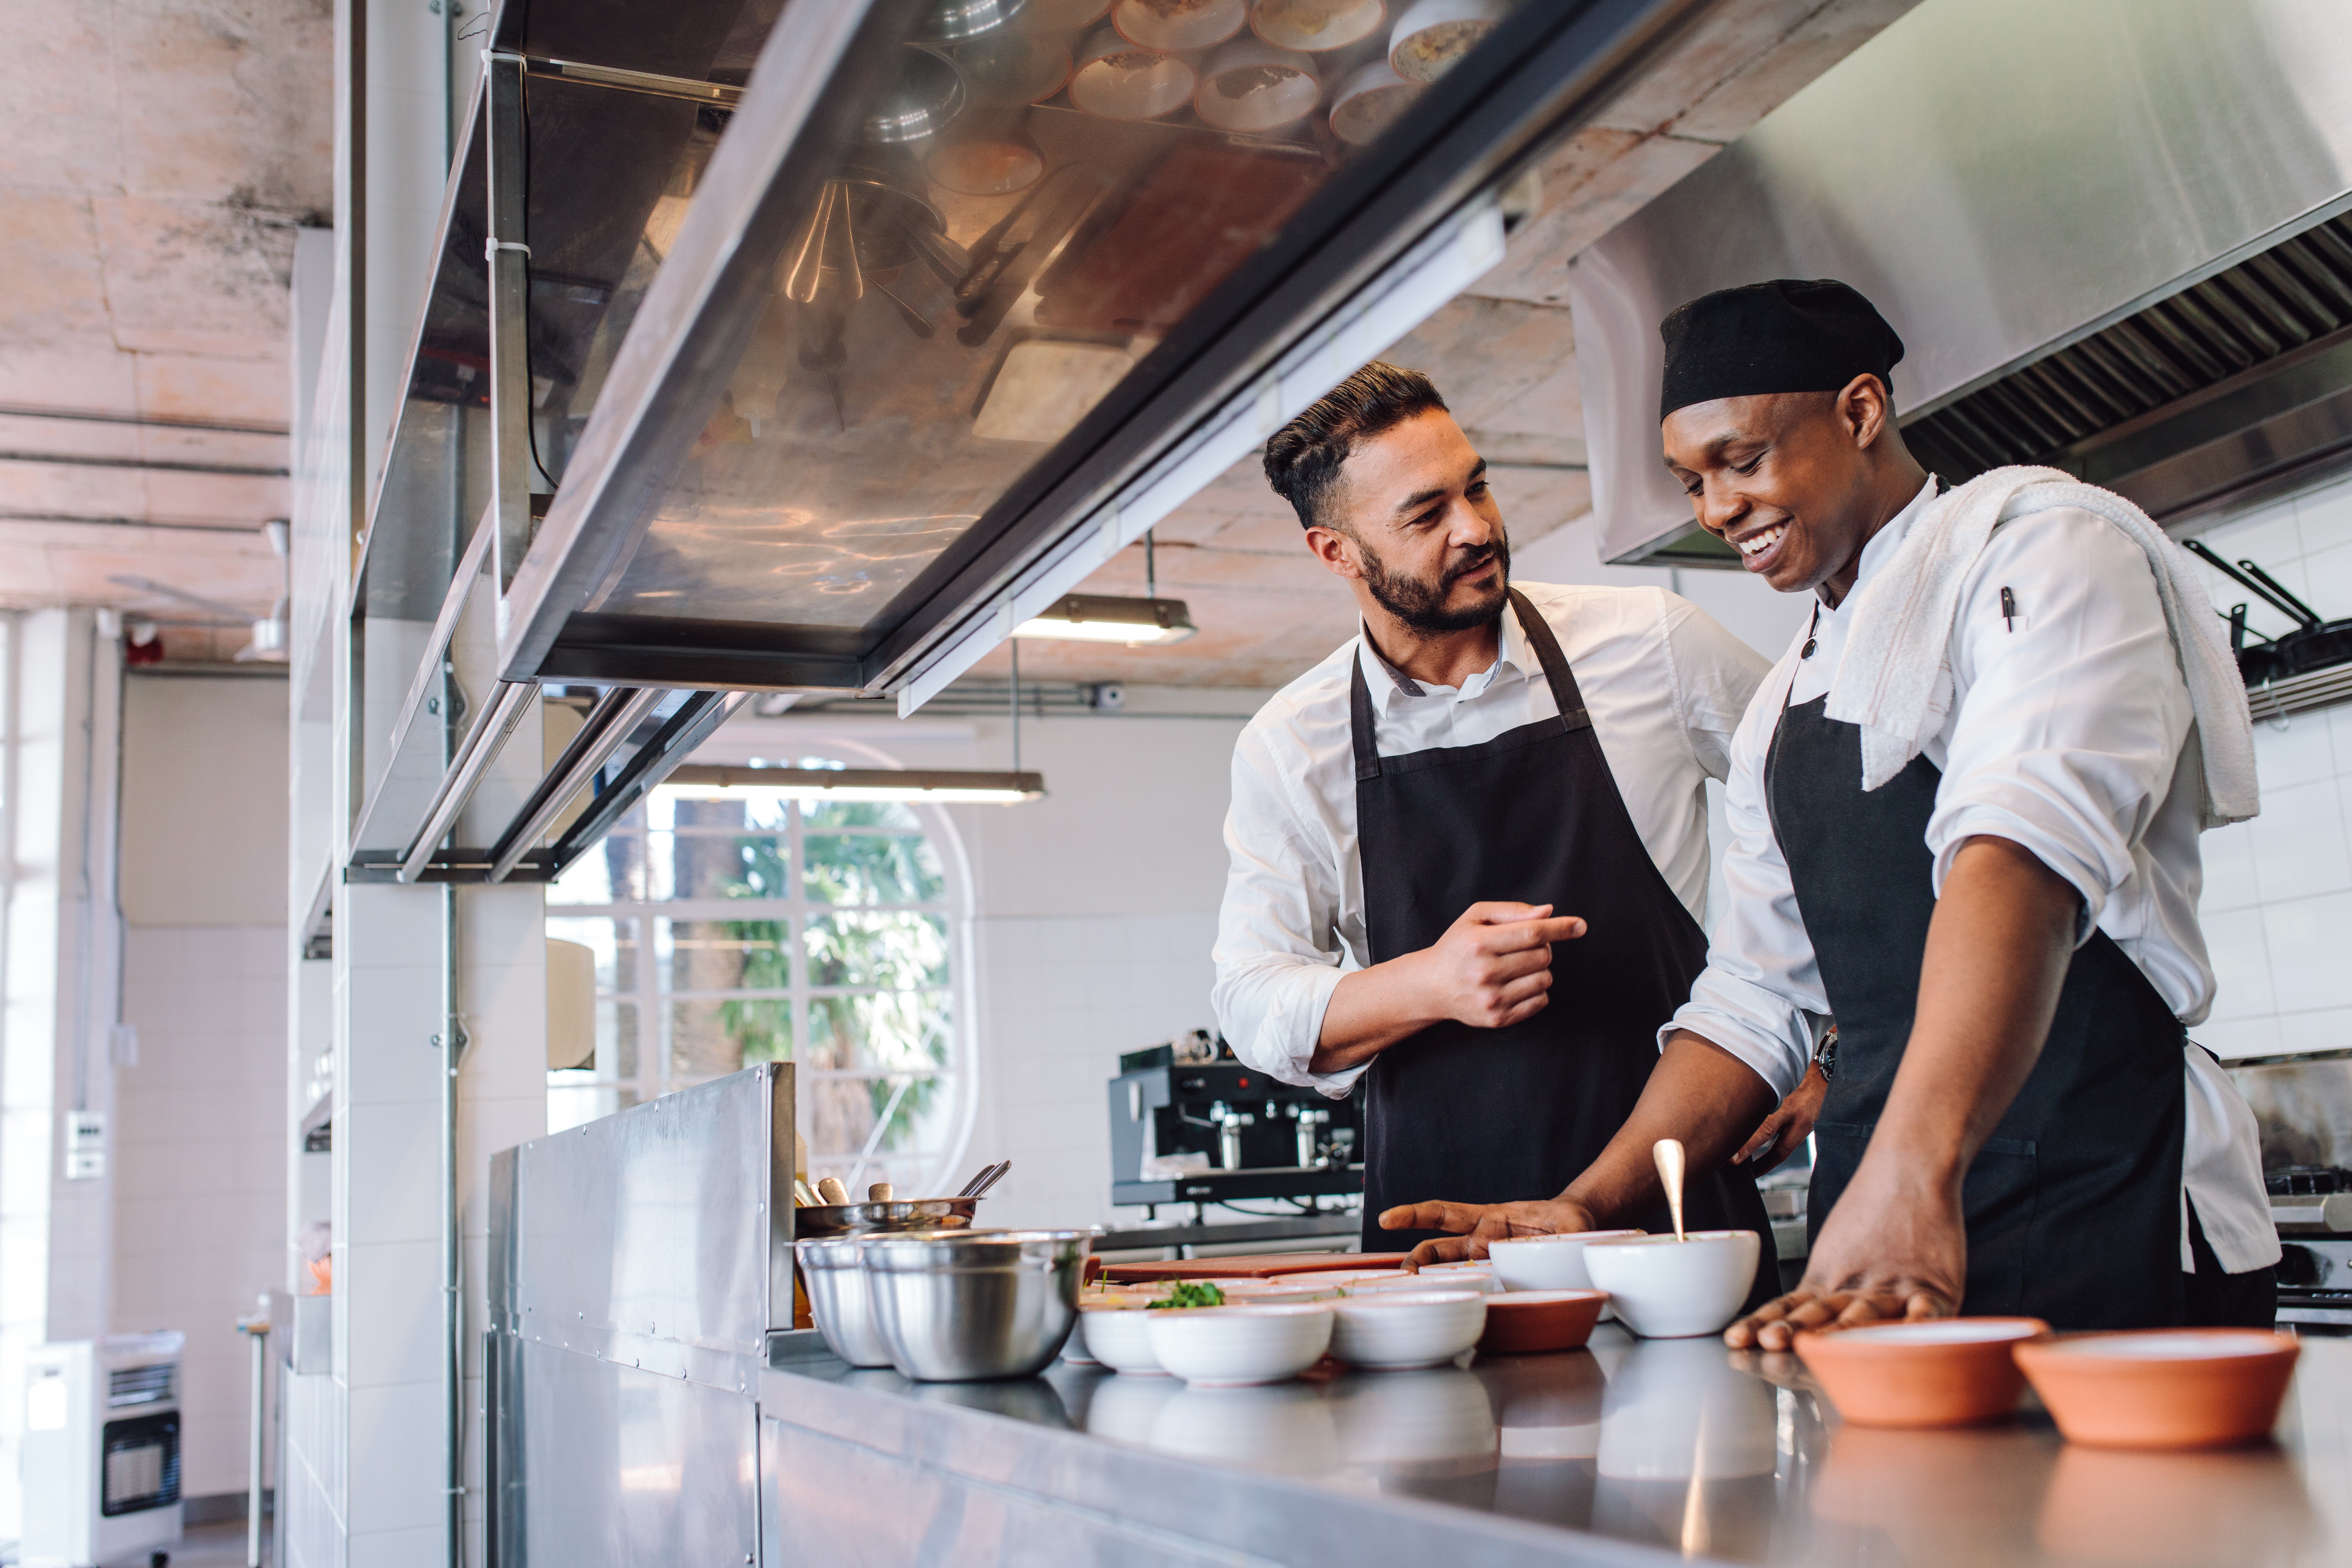 Working in The Restaurant Industry: What You Need to Know